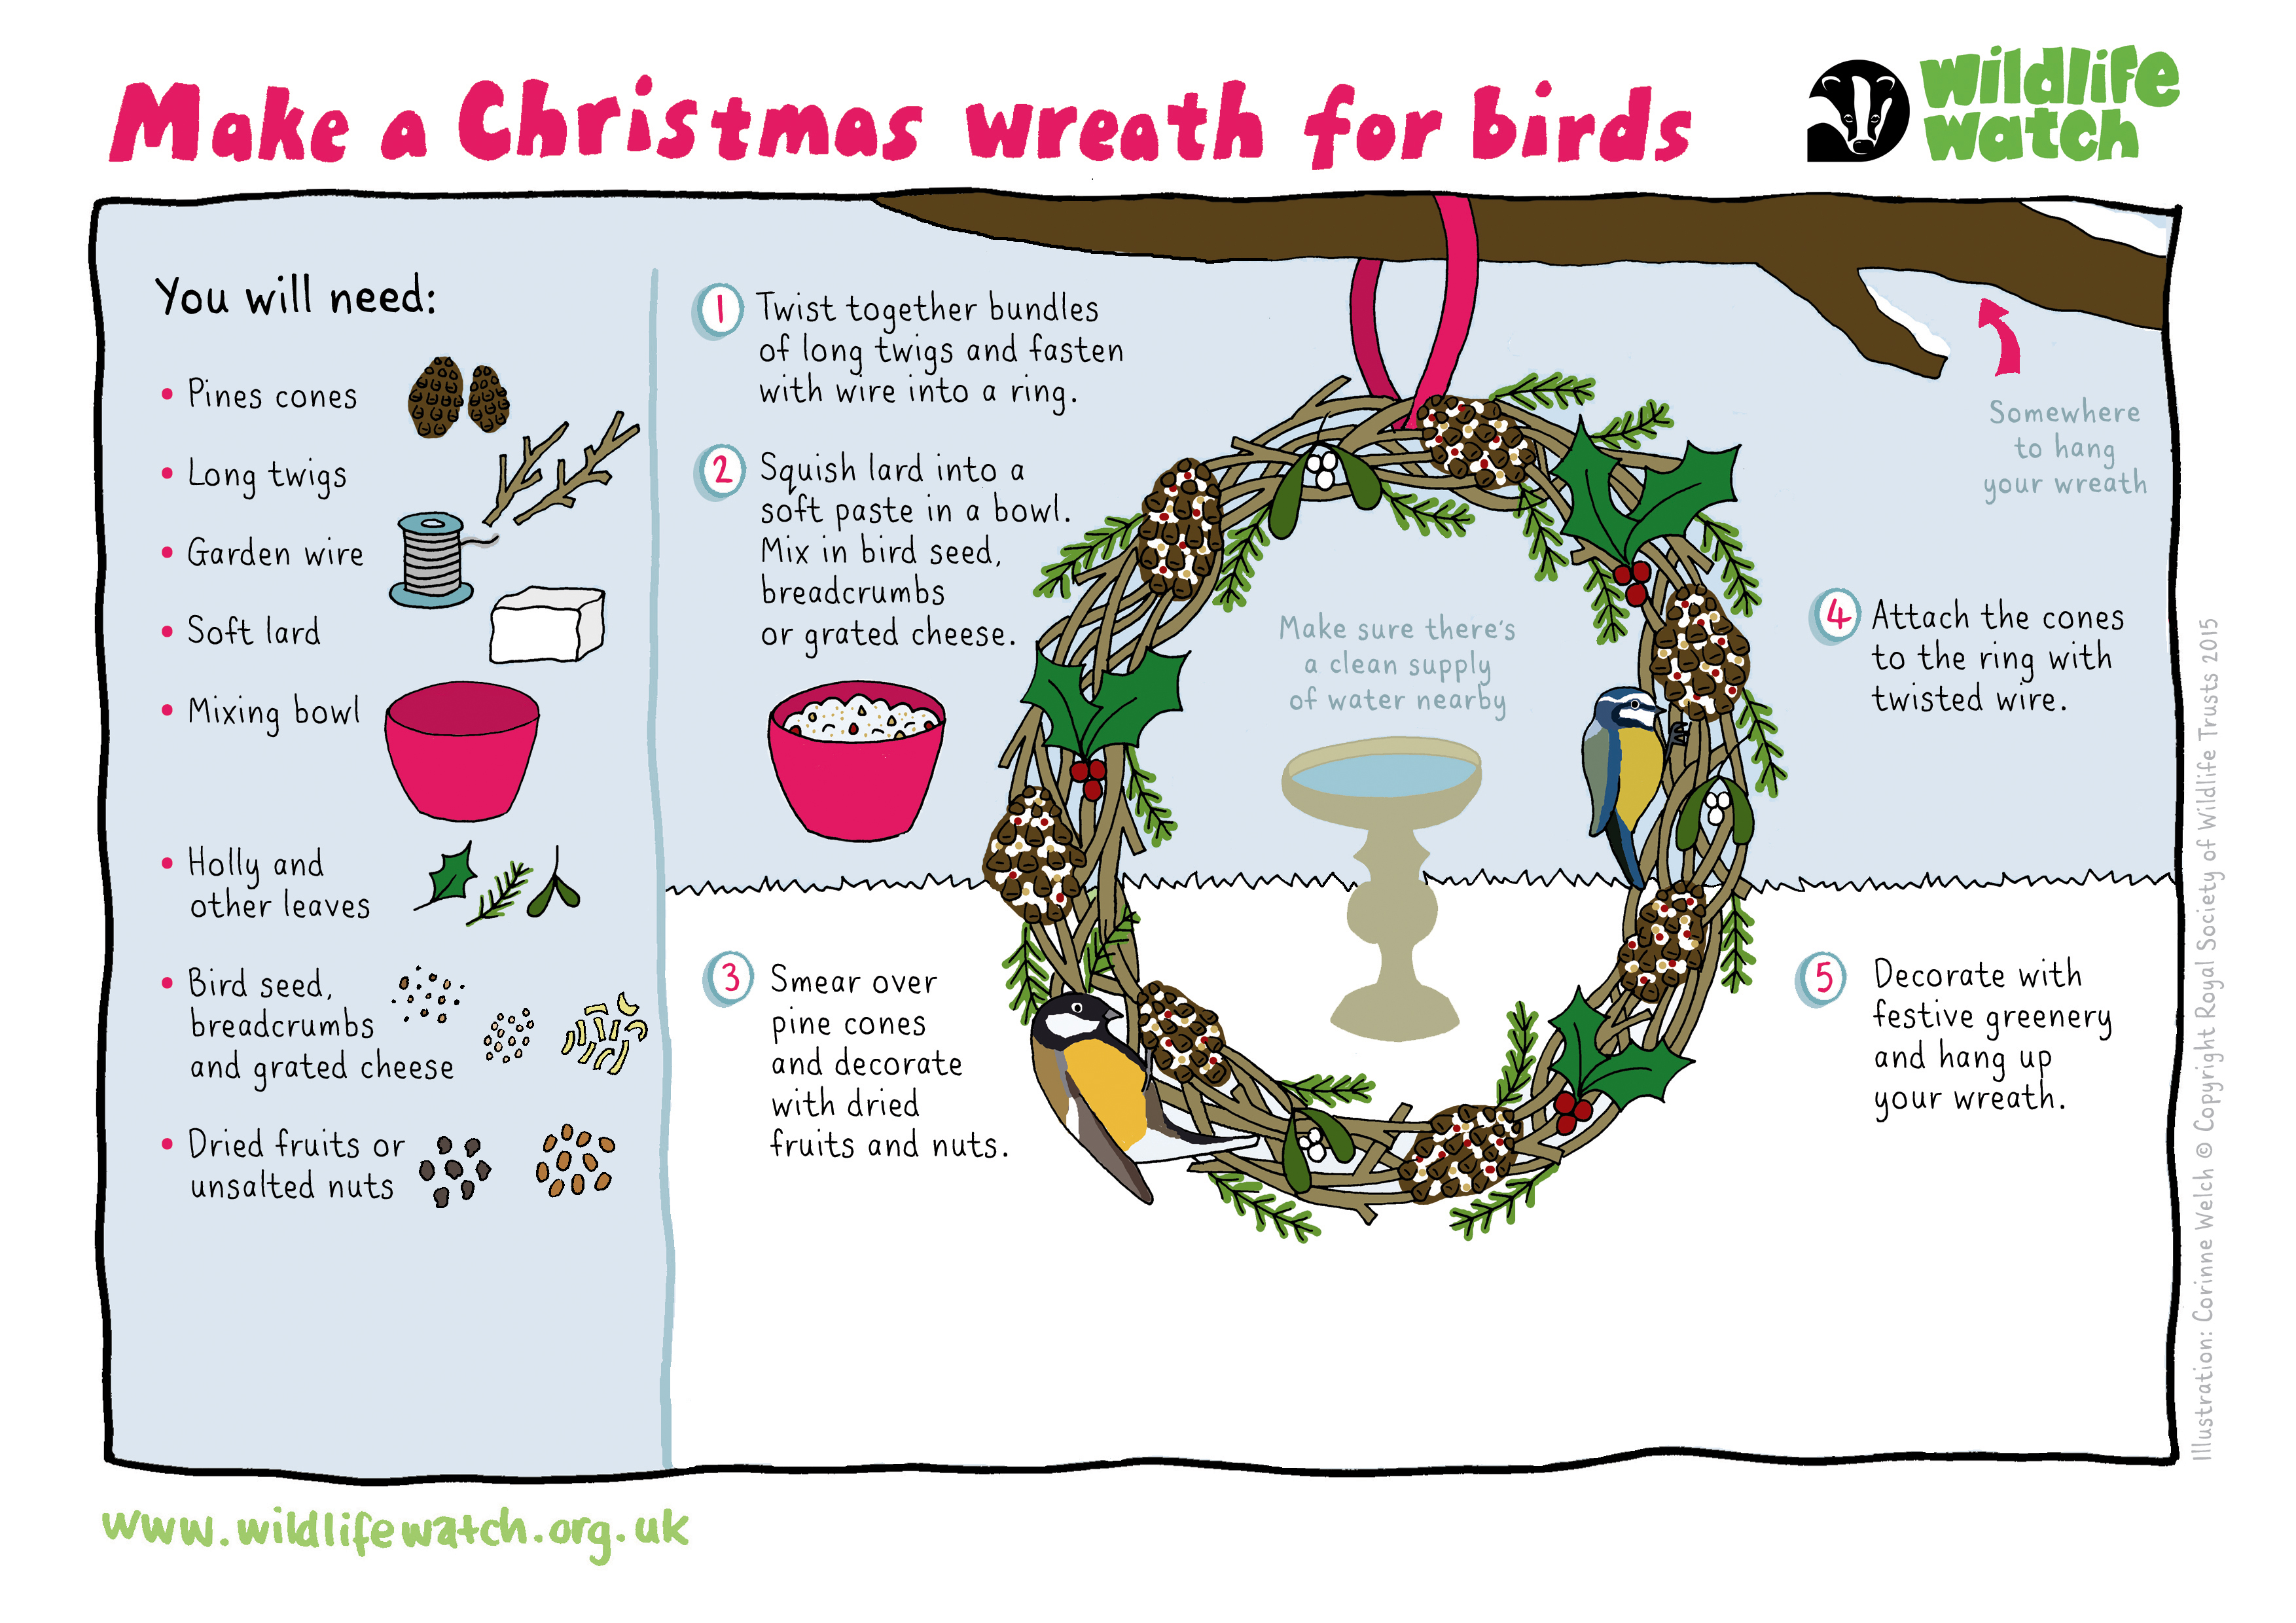 Page on how to make a christmas wreath for birds (The Wildlife Trusts/PA)